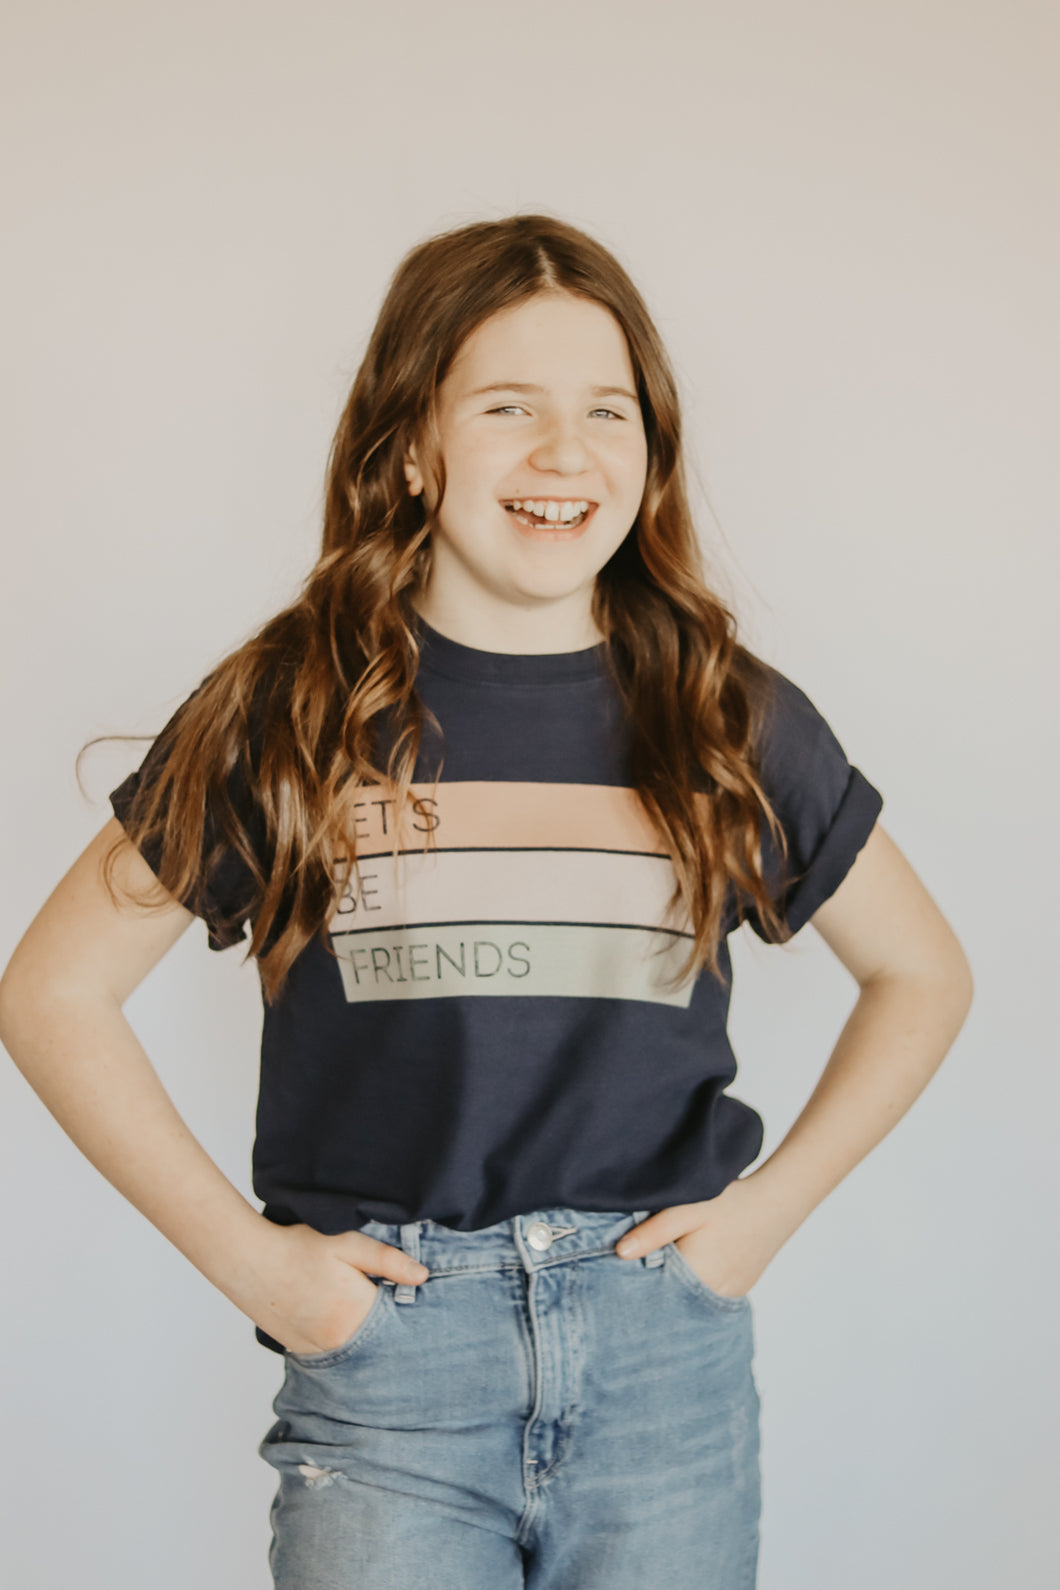 Let's Be Friends T-shirt - Youth - Navy